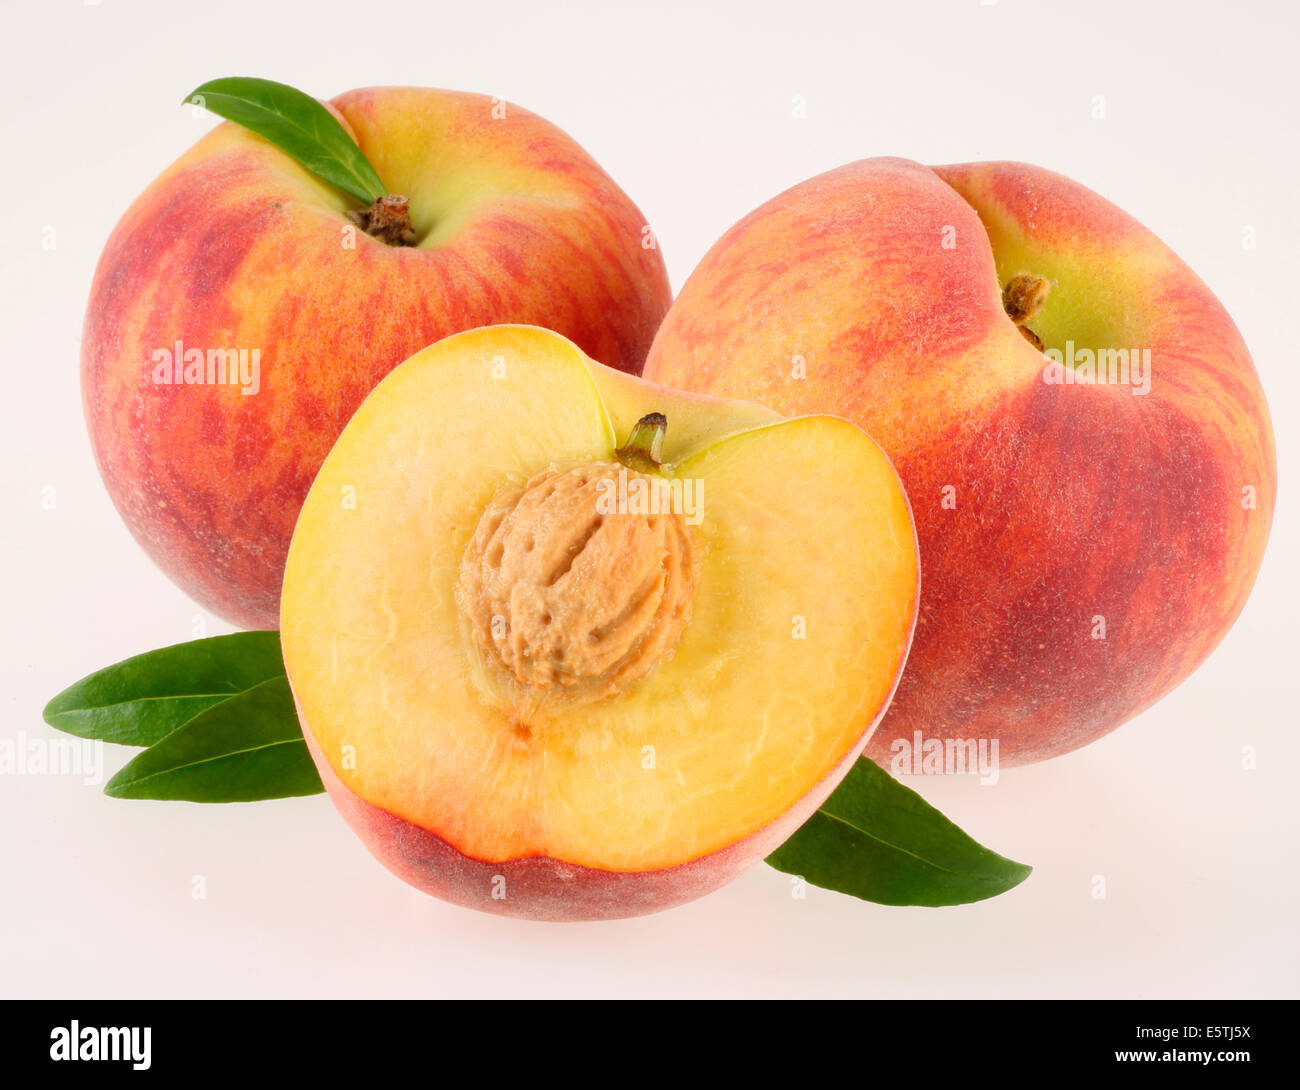 GROUP OF PEACHES Stock Photo